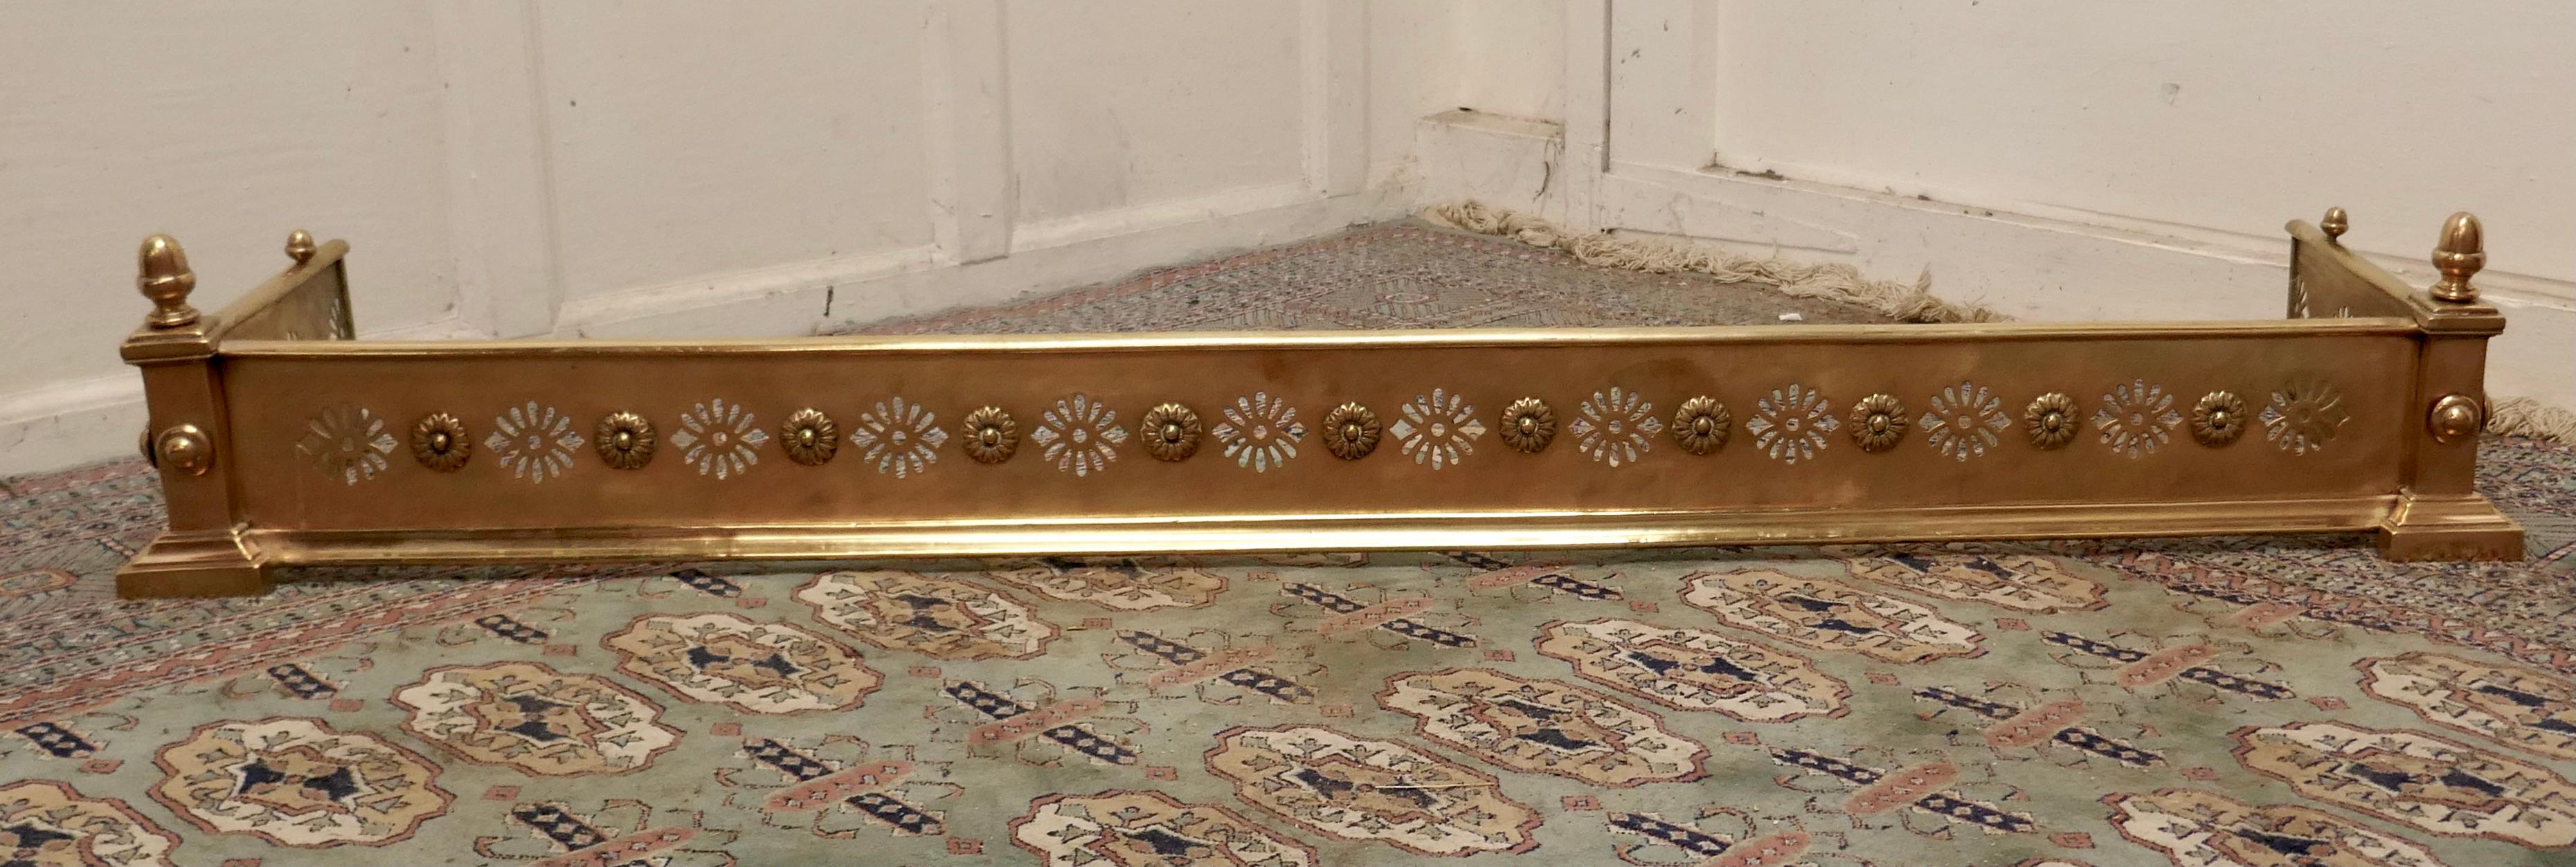 Victorian pierced brass fender

This is a very superior quality Victorian pierced brass fender it has circular piercing and roundels along the front and sides with turned finials at each end 
The fender is in very good condition it is 9” high,